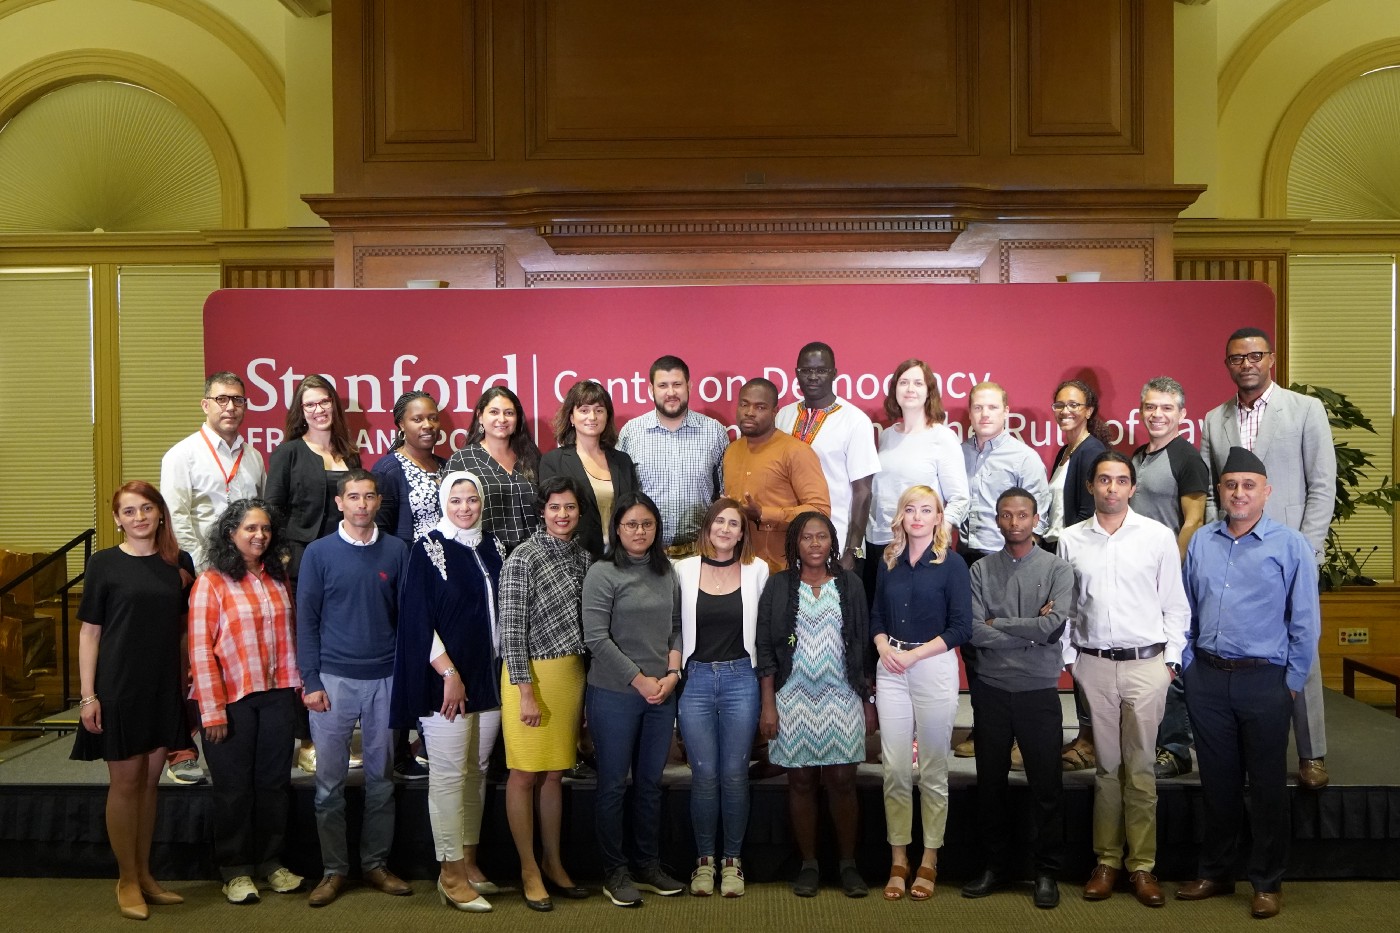 The 2019 Draper Hills Fellows Program Class of 2019 at the Freeman Spogli Institute for International Studies. Photo Credit: Stanford Center on Democracy, Development and the Rule of Law